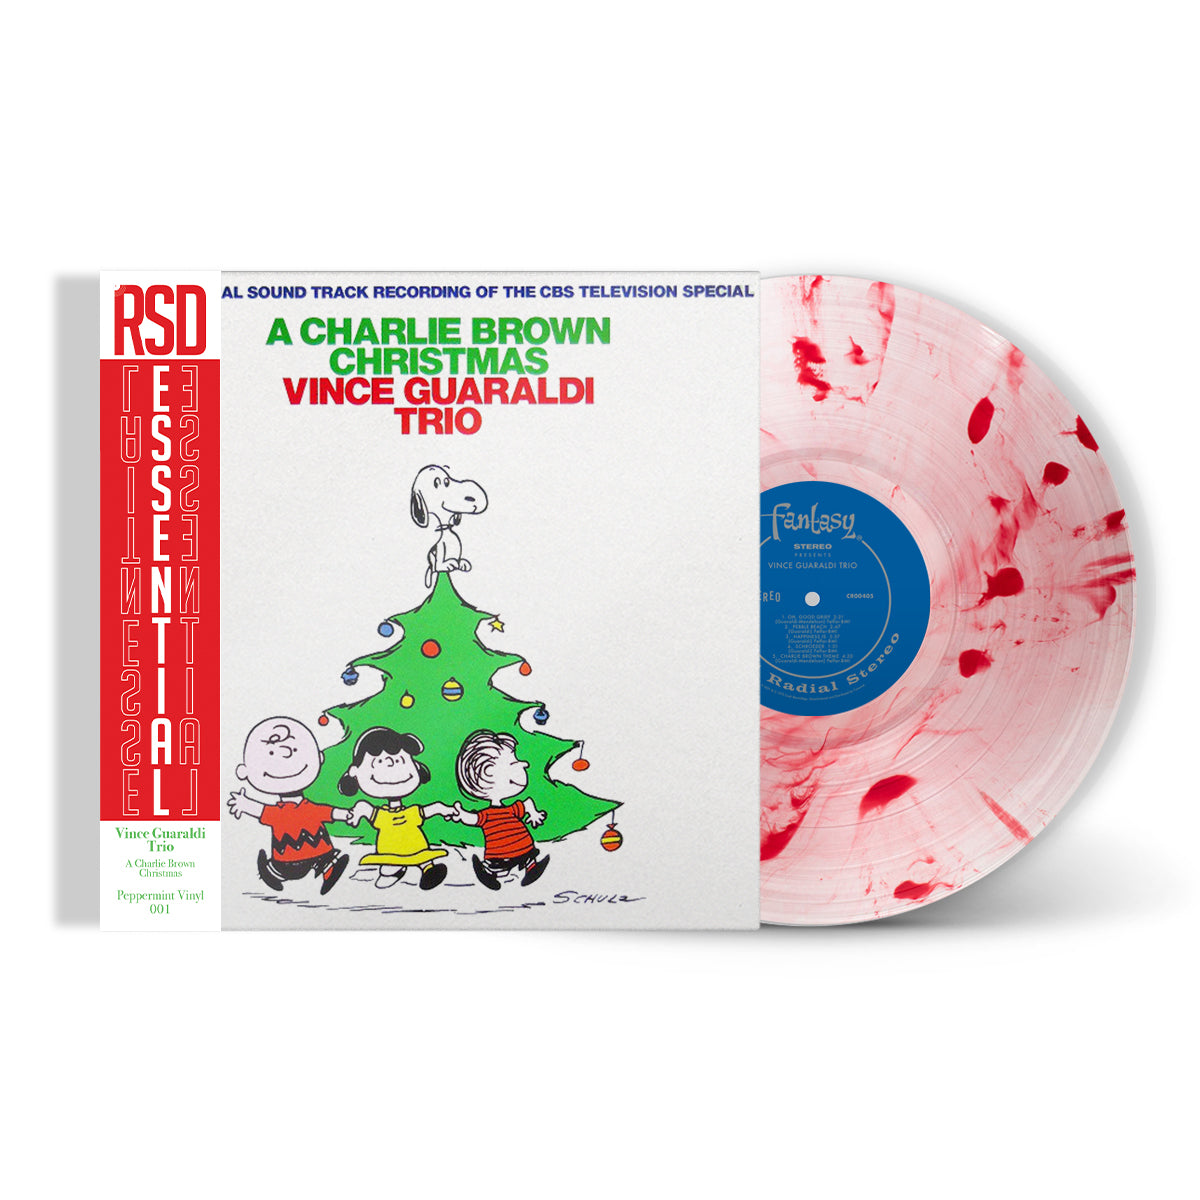 VINCE GUARALDI TRIO | A CHARLIE BROWN CHRISTMAS (Peppermint Colored) | Vinyl